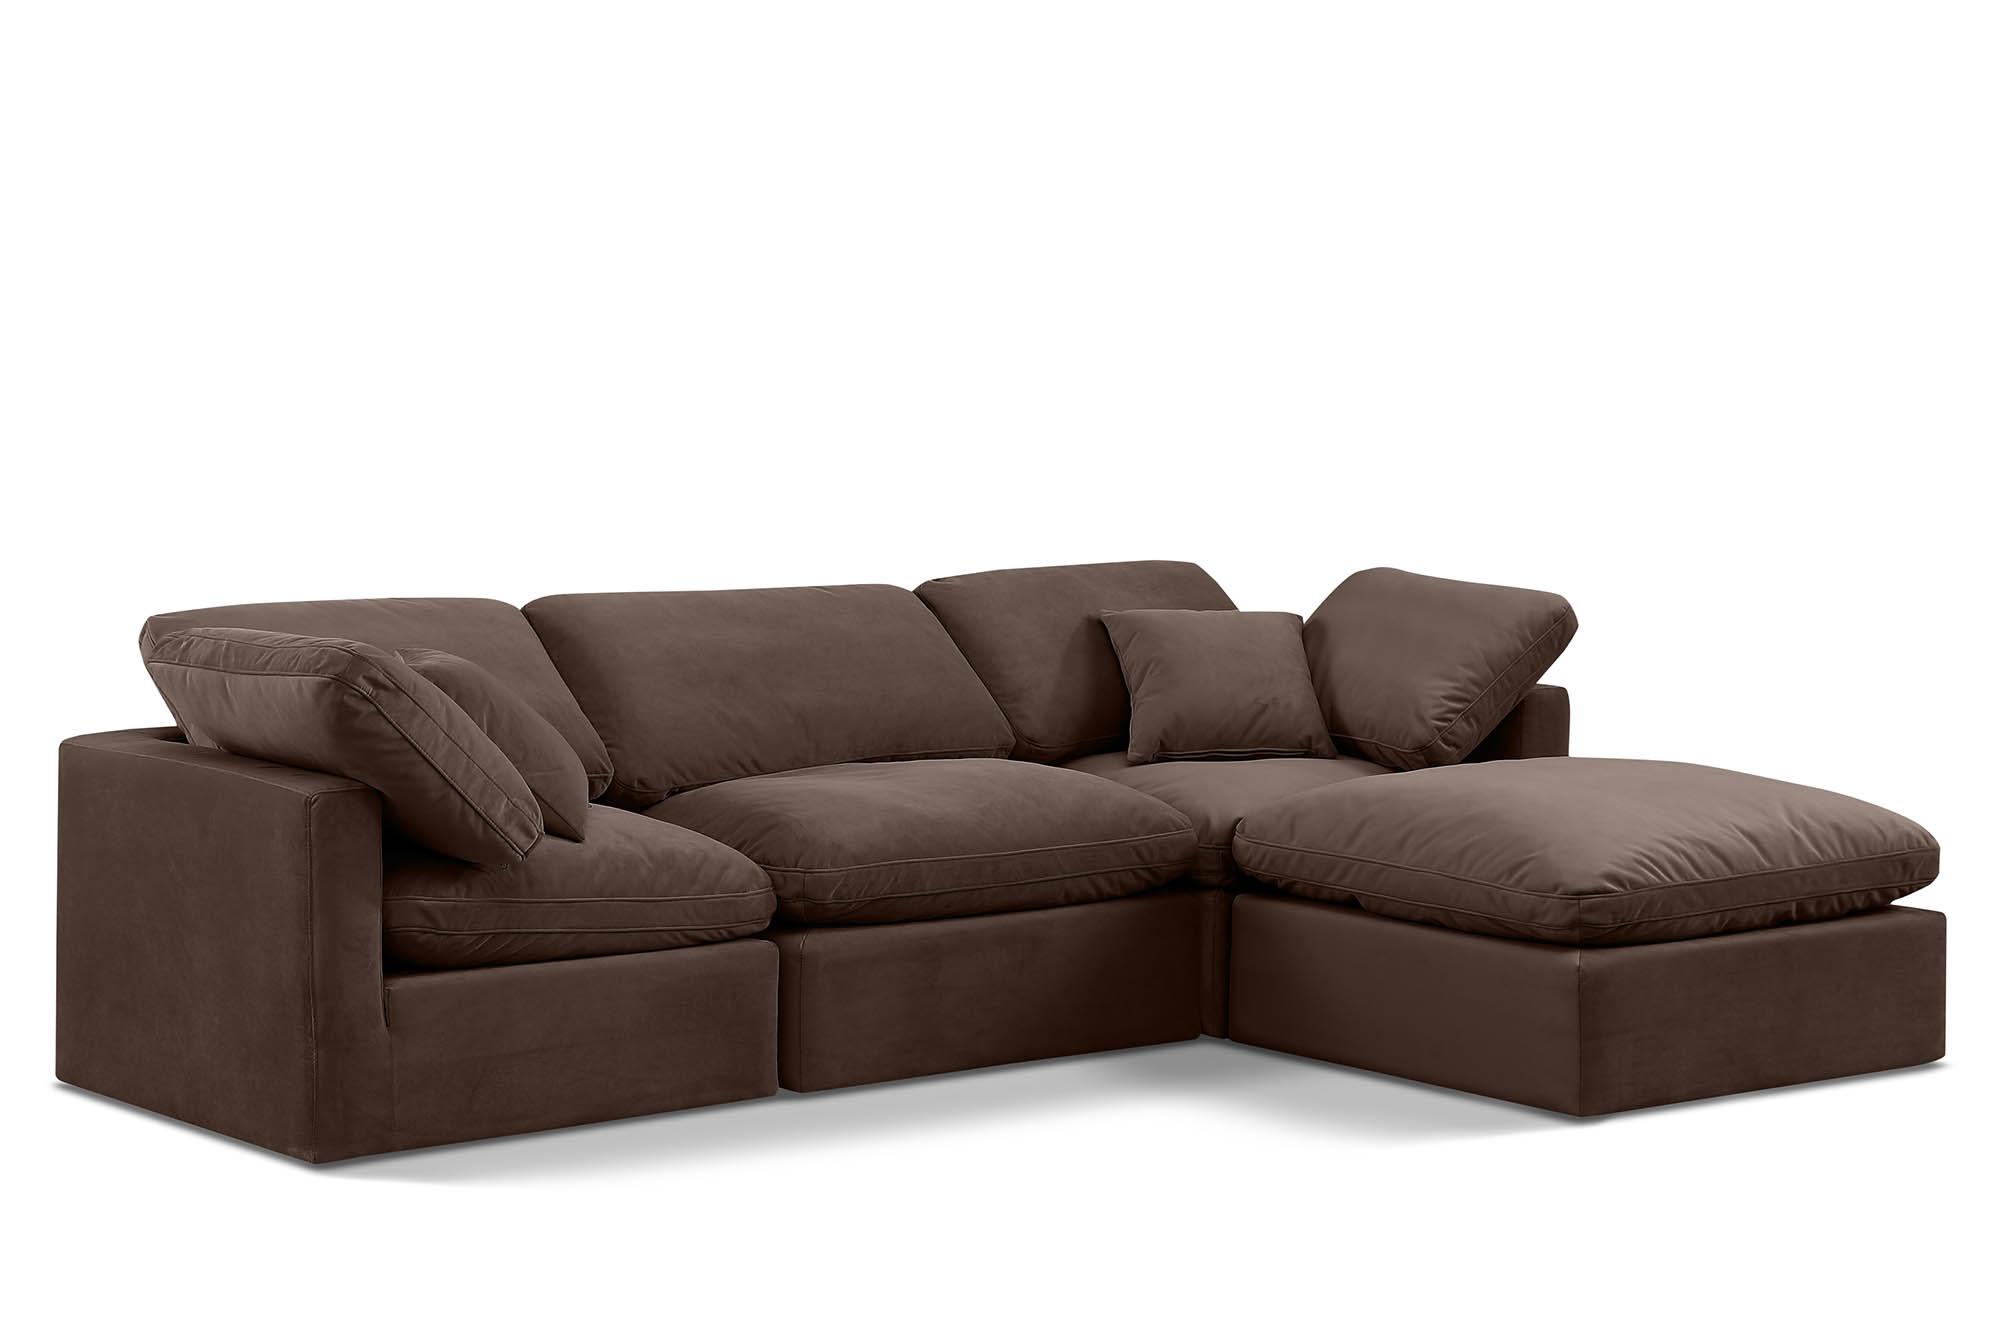 Contemporary, Modern Modular Sectional Sofa INDULGE 147Brown-Sec4A 147Brown-Sec4A in Brown Velvet